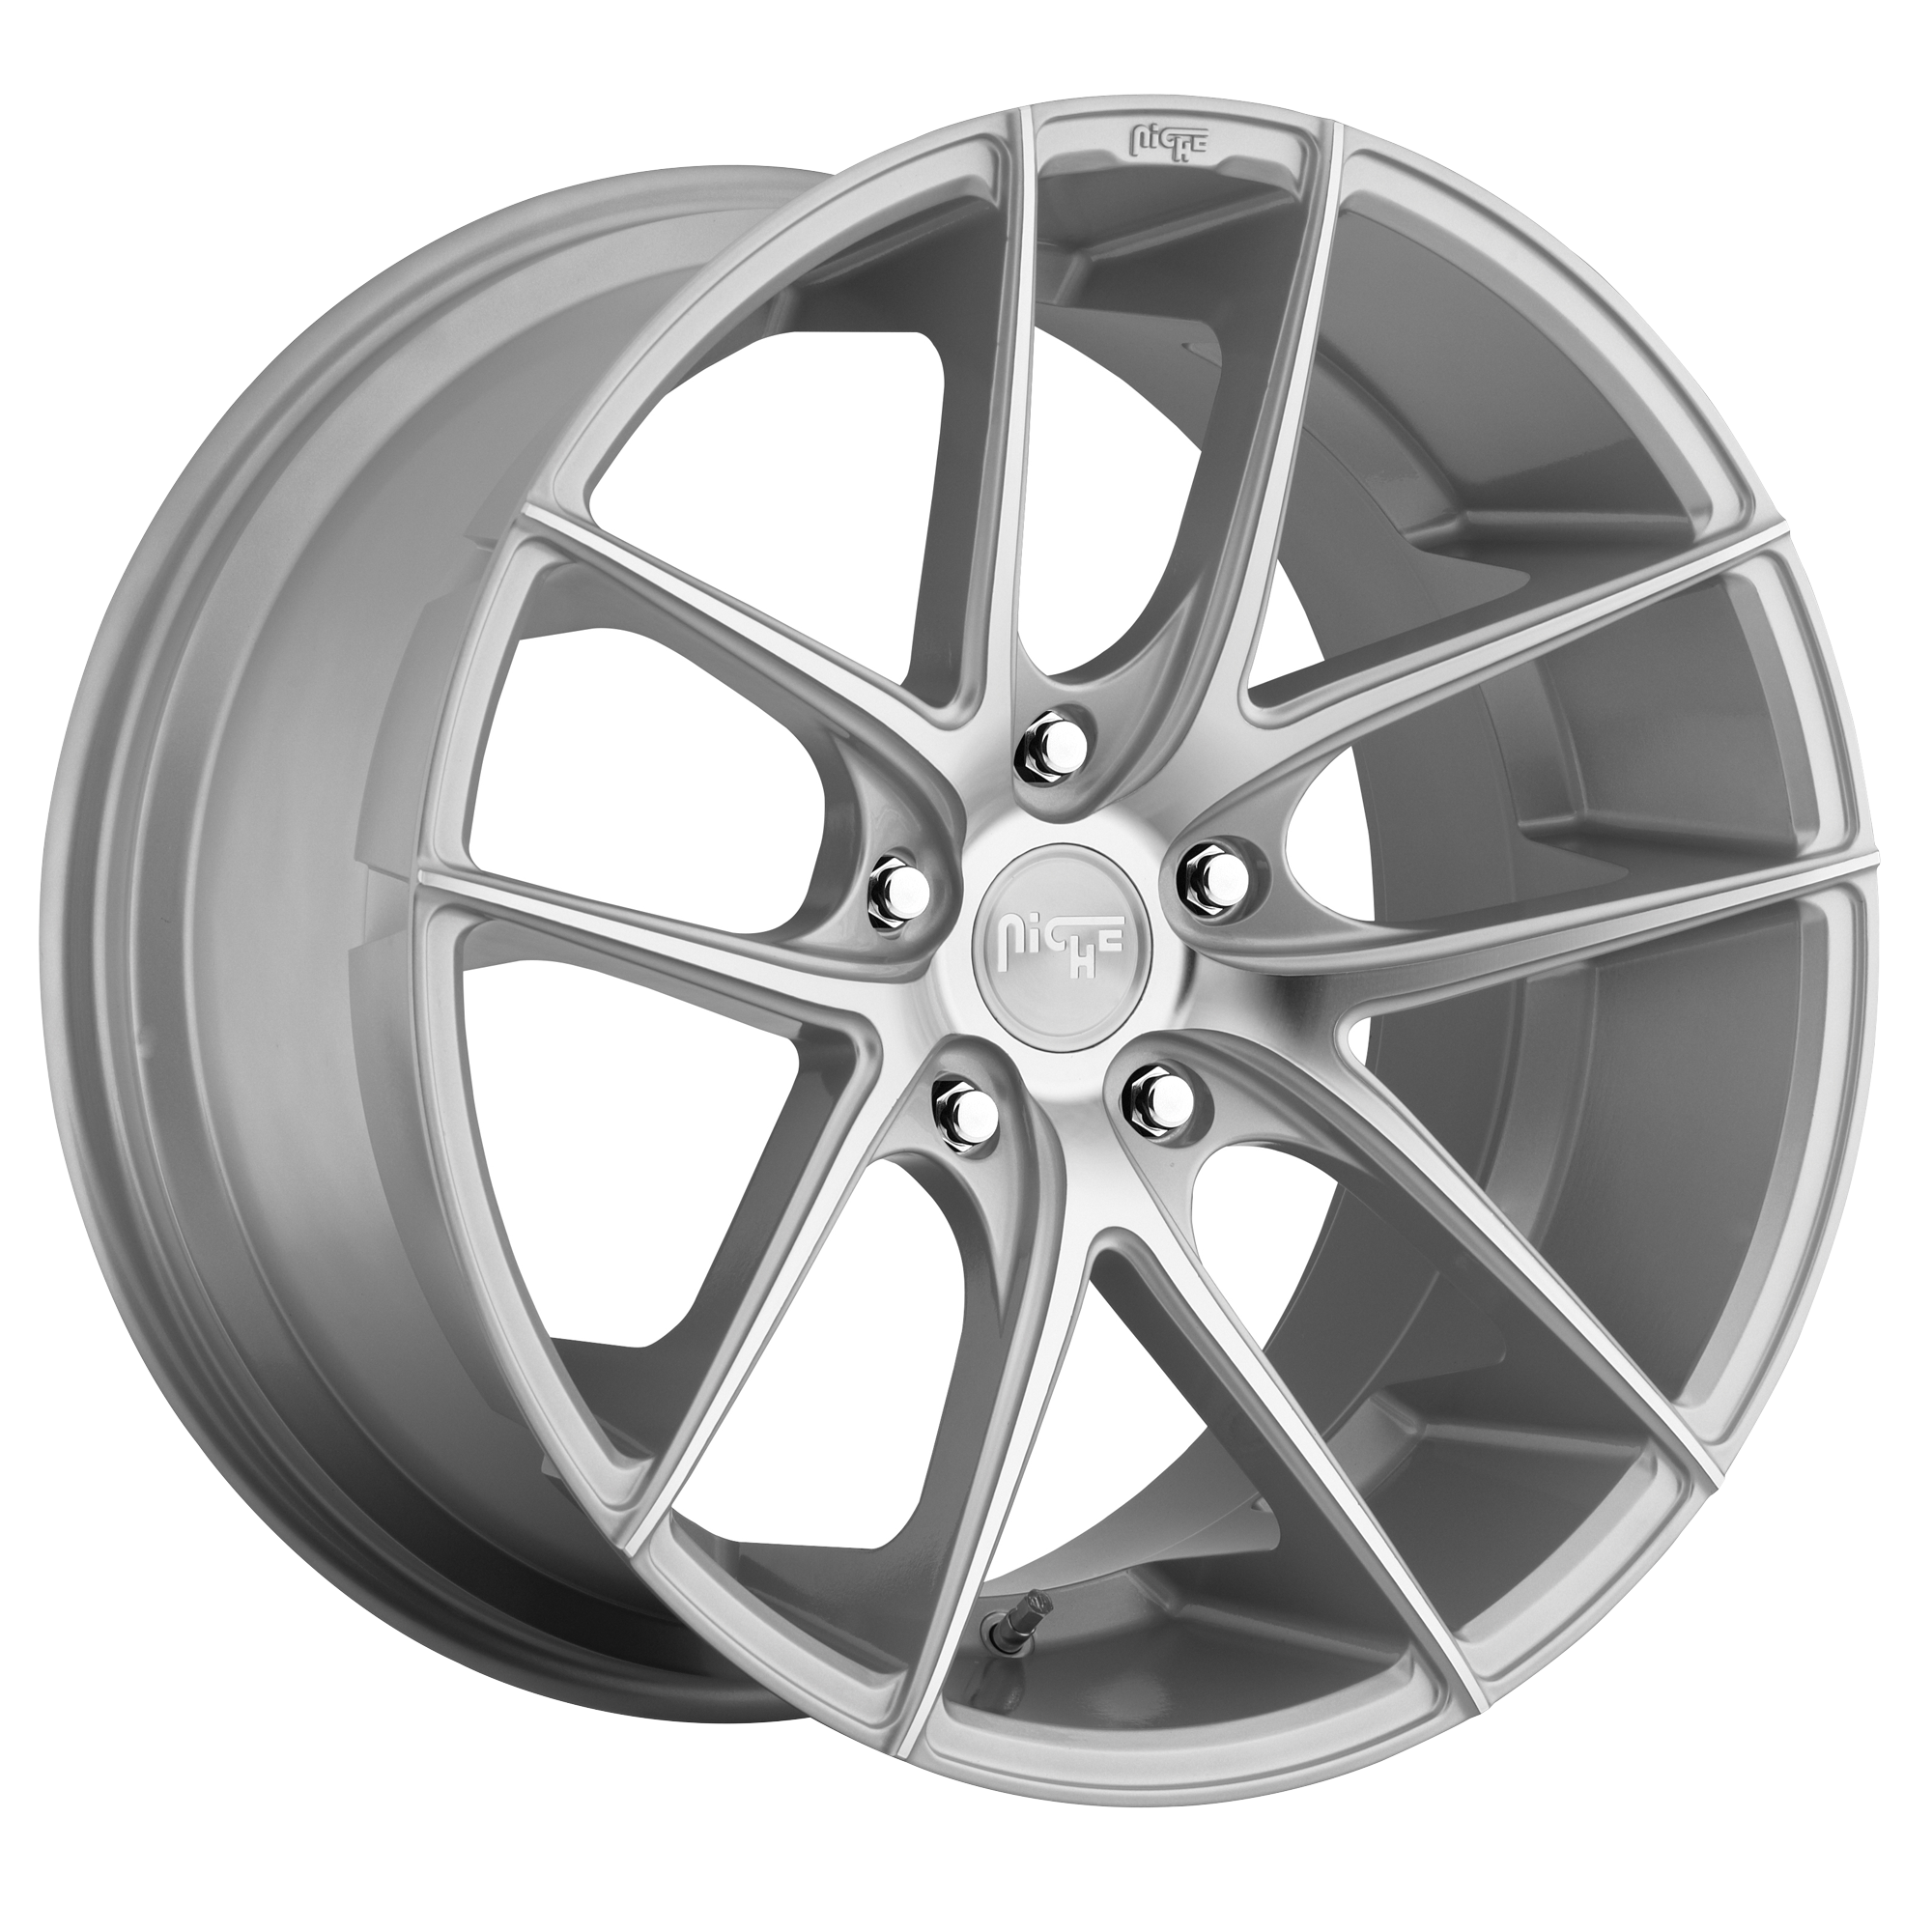 TARGA 20x8.5 5x120.00 GLOSS SILVER MACHINED (35 mm) - Tires and Engine Performance